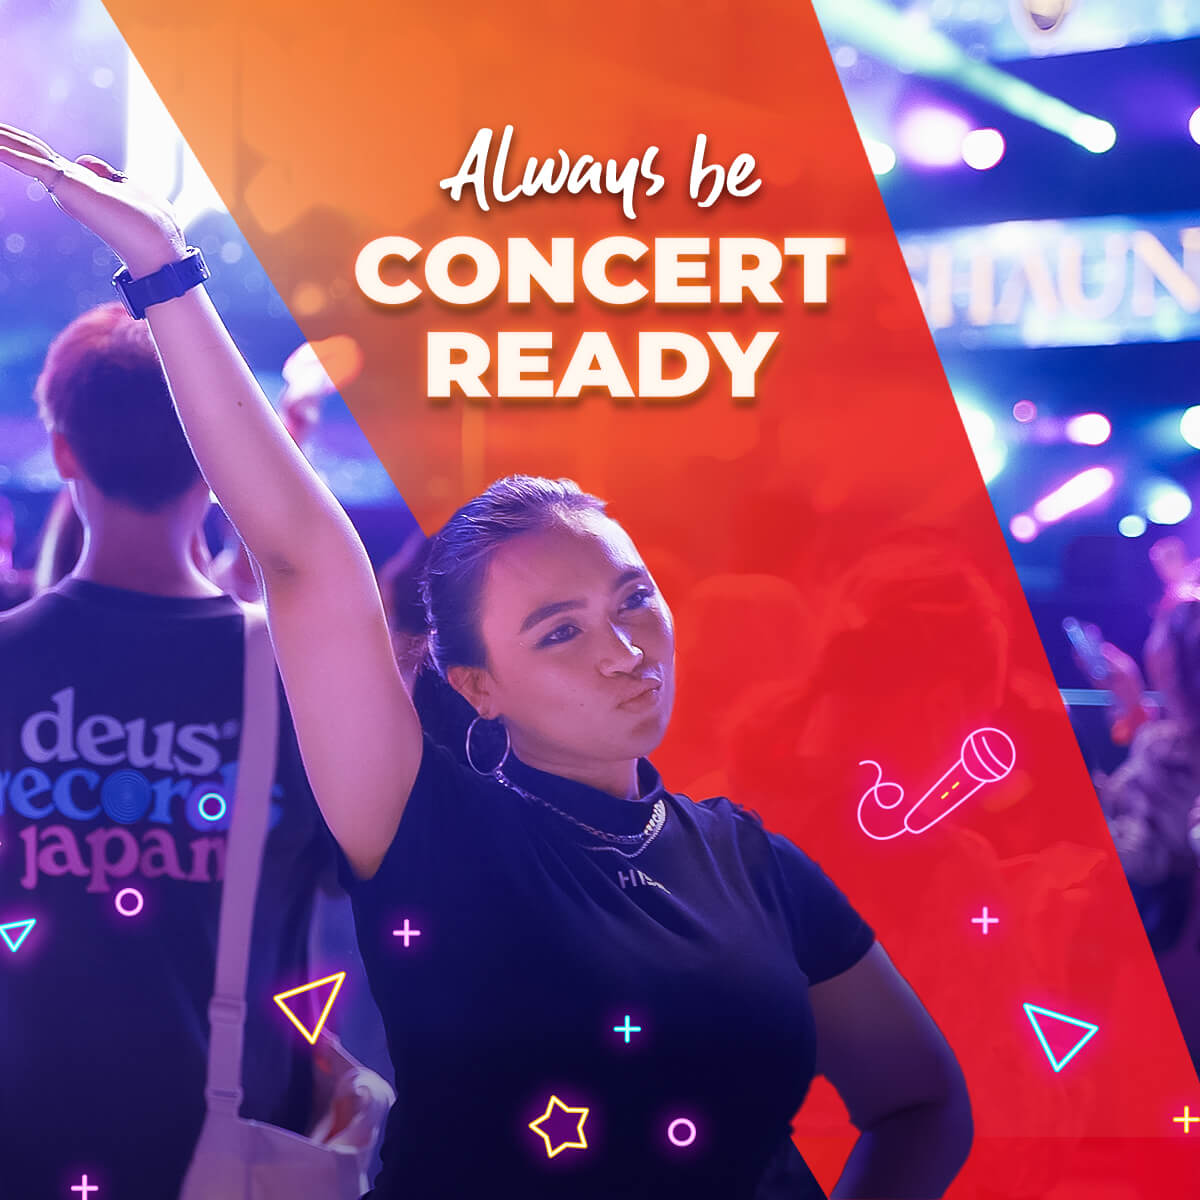 Tips to Prepare & Make the Most Out of Your Next Concert